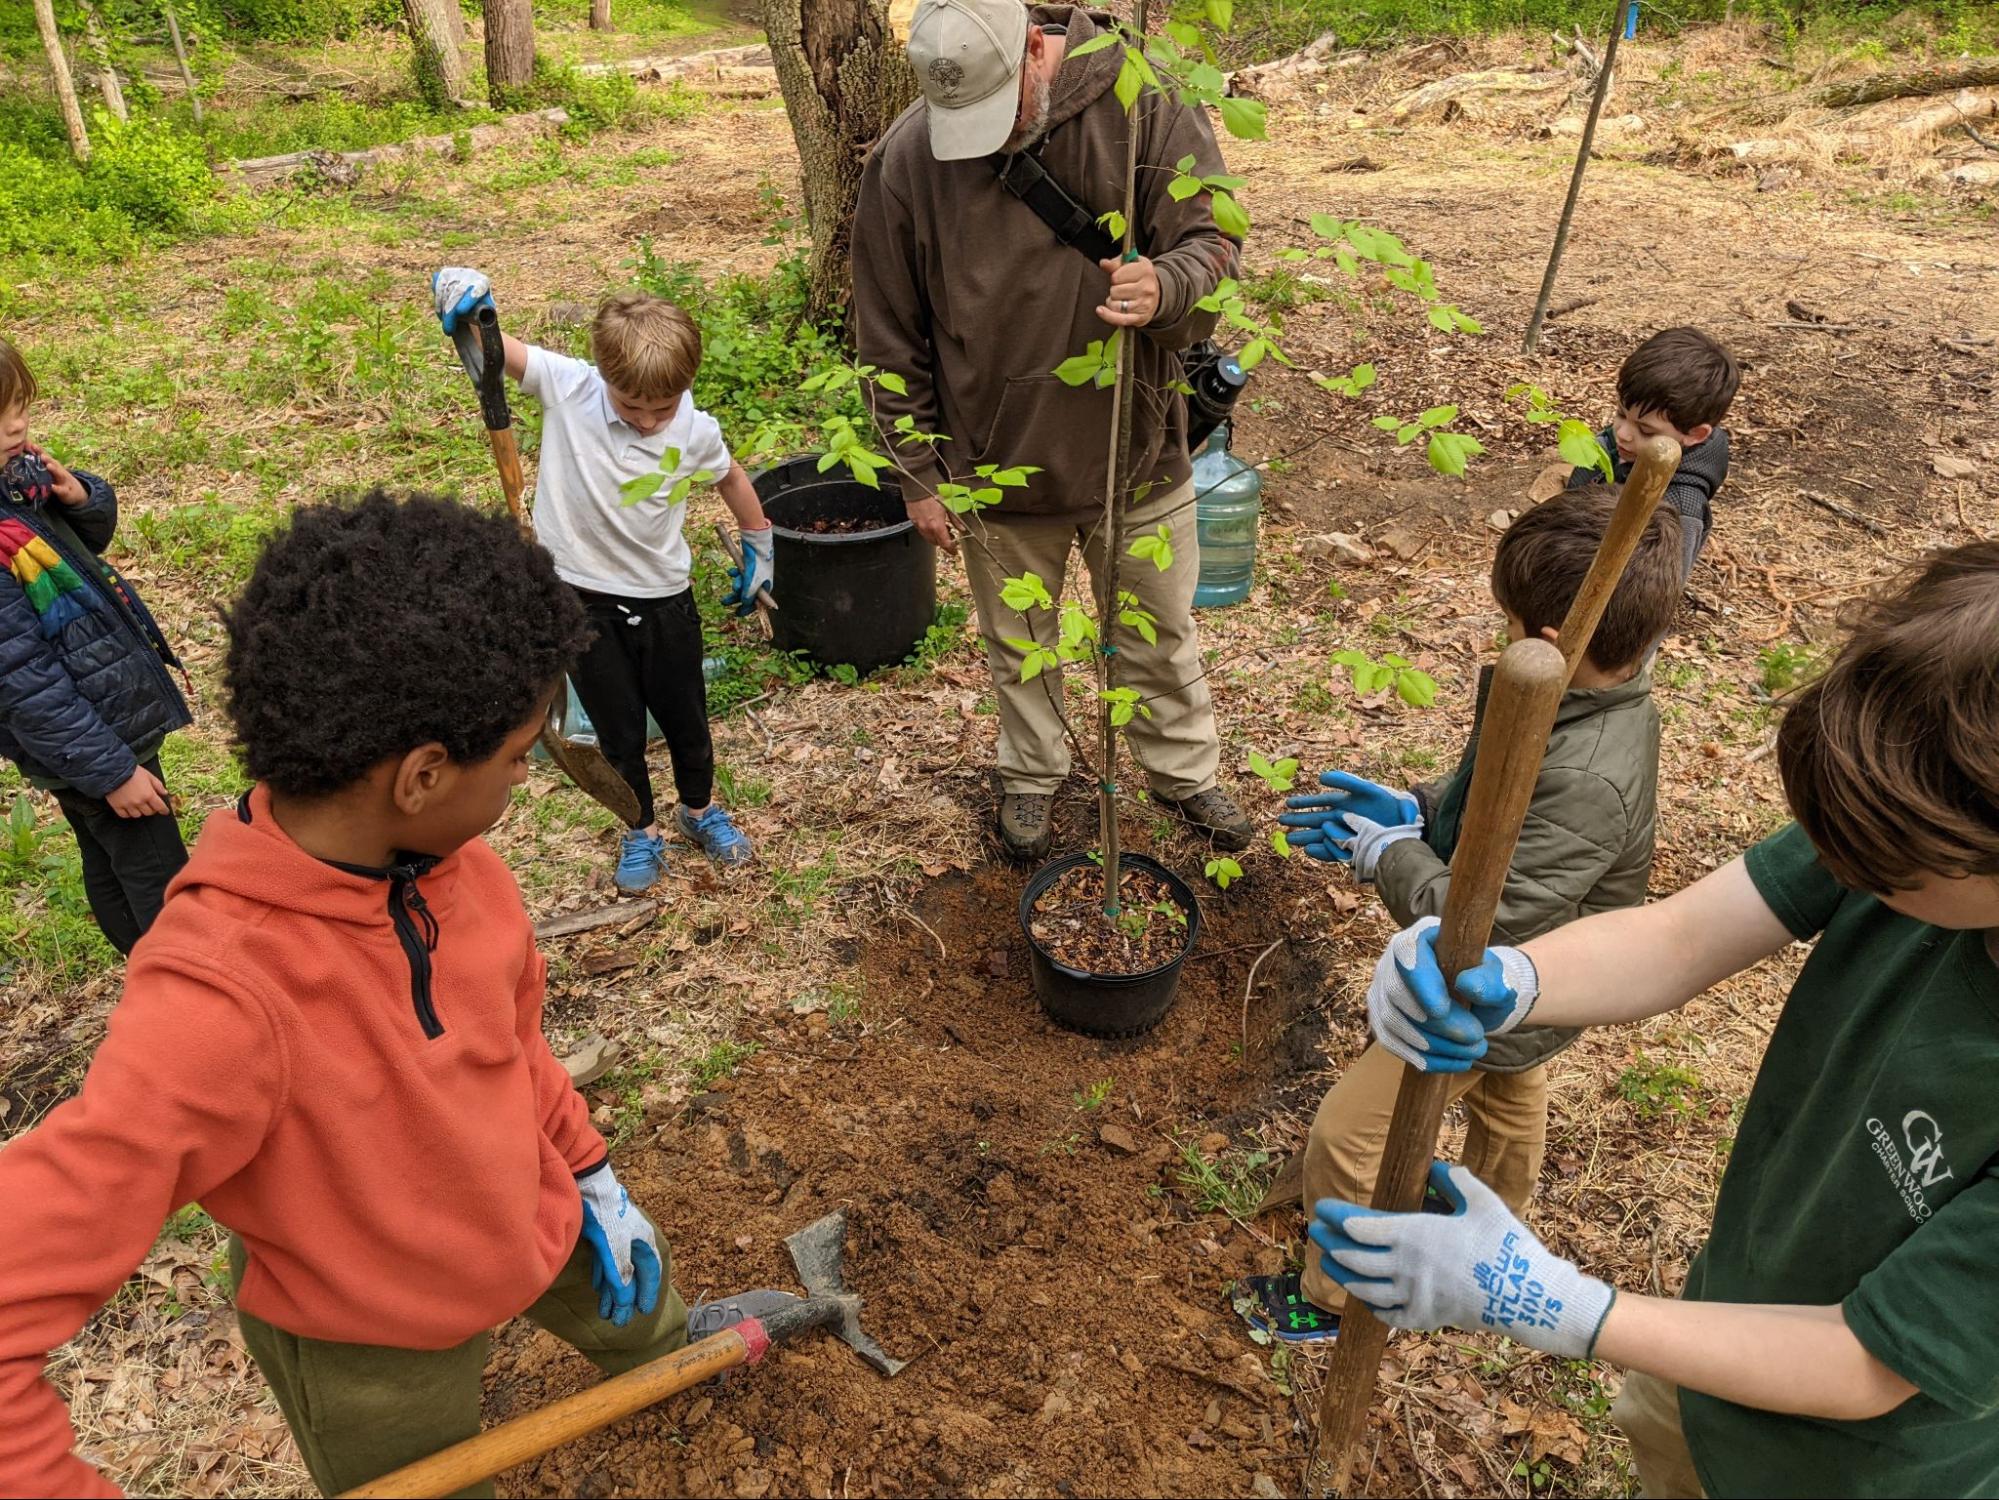 Children helping to plant a tree in the forest